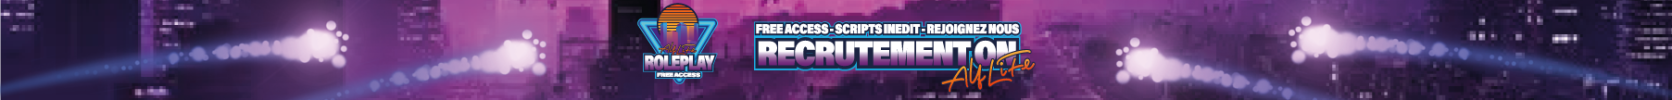 RECRUTEMENT-ON-GTA-BANNER.png